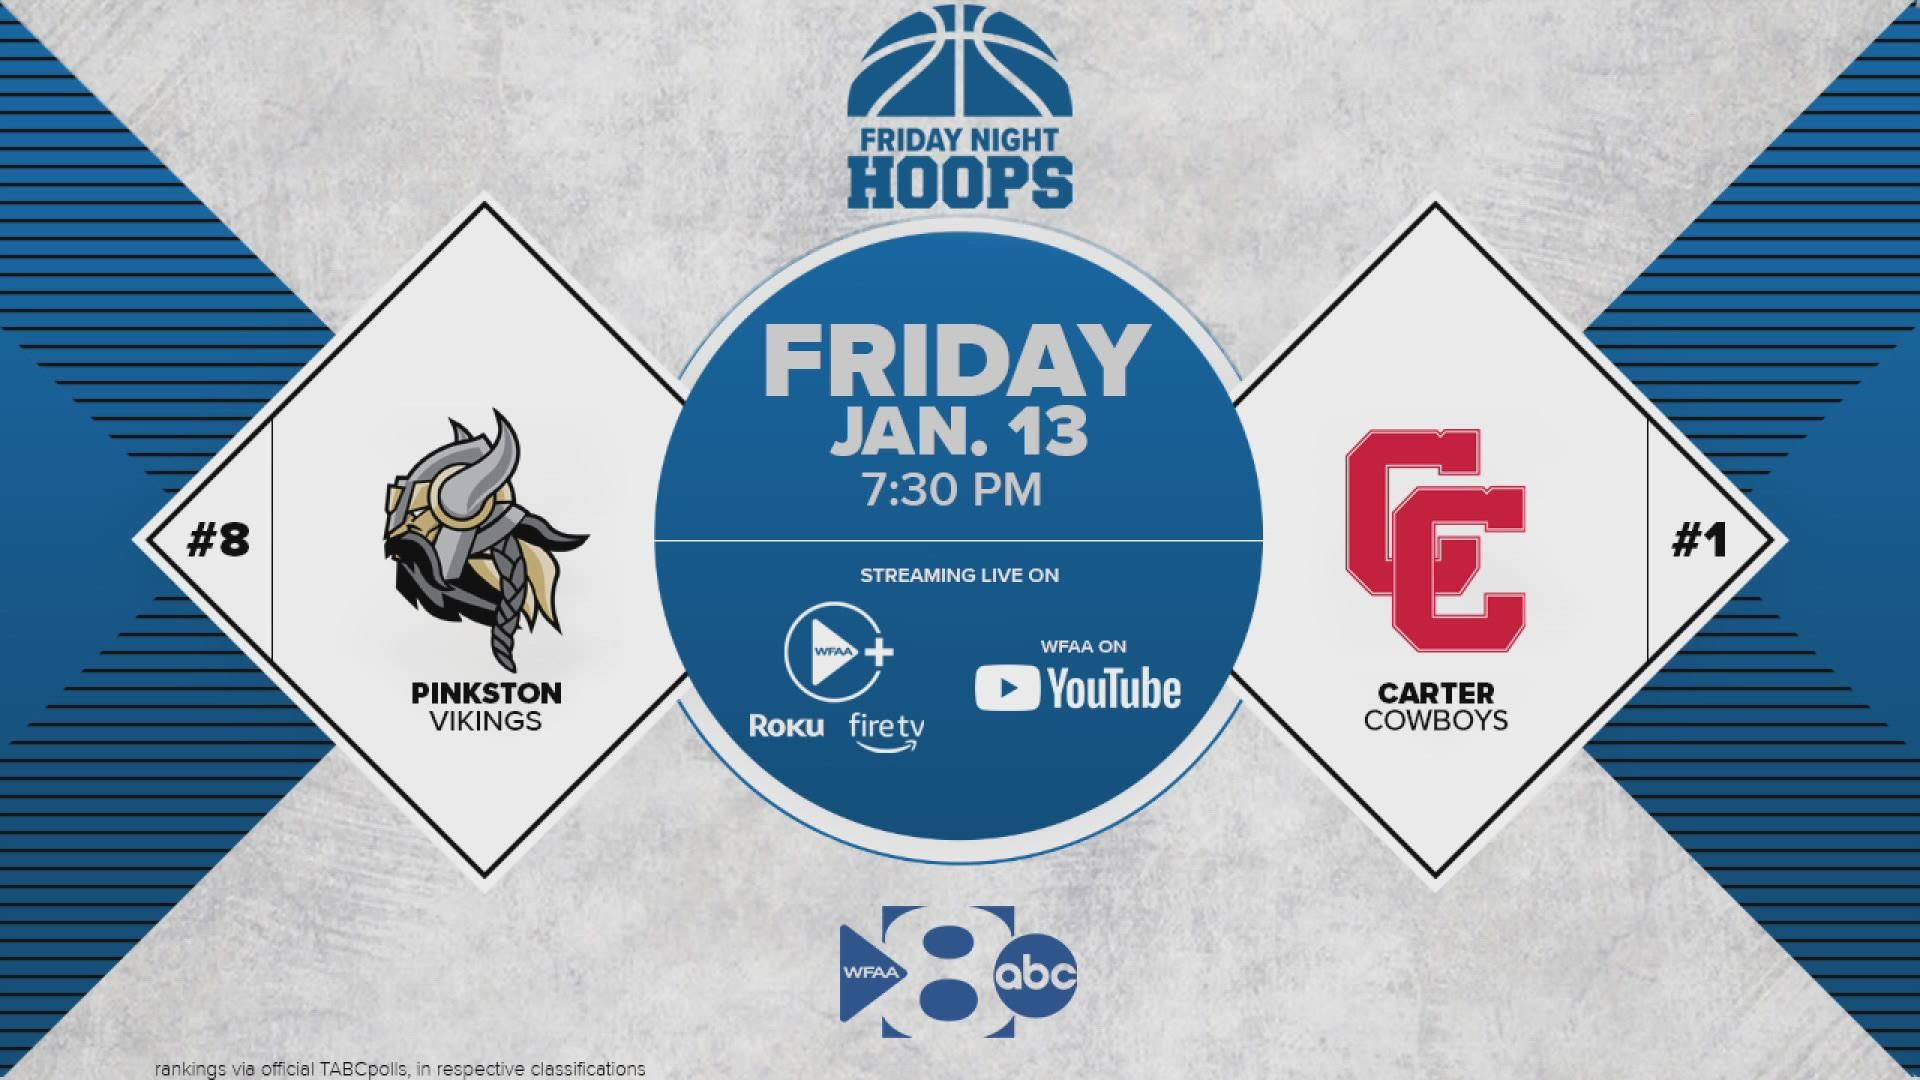 WFAA to broadcast elite high school basketball matchup, as No. 1 Carter hosts No. 8 Pinkston.